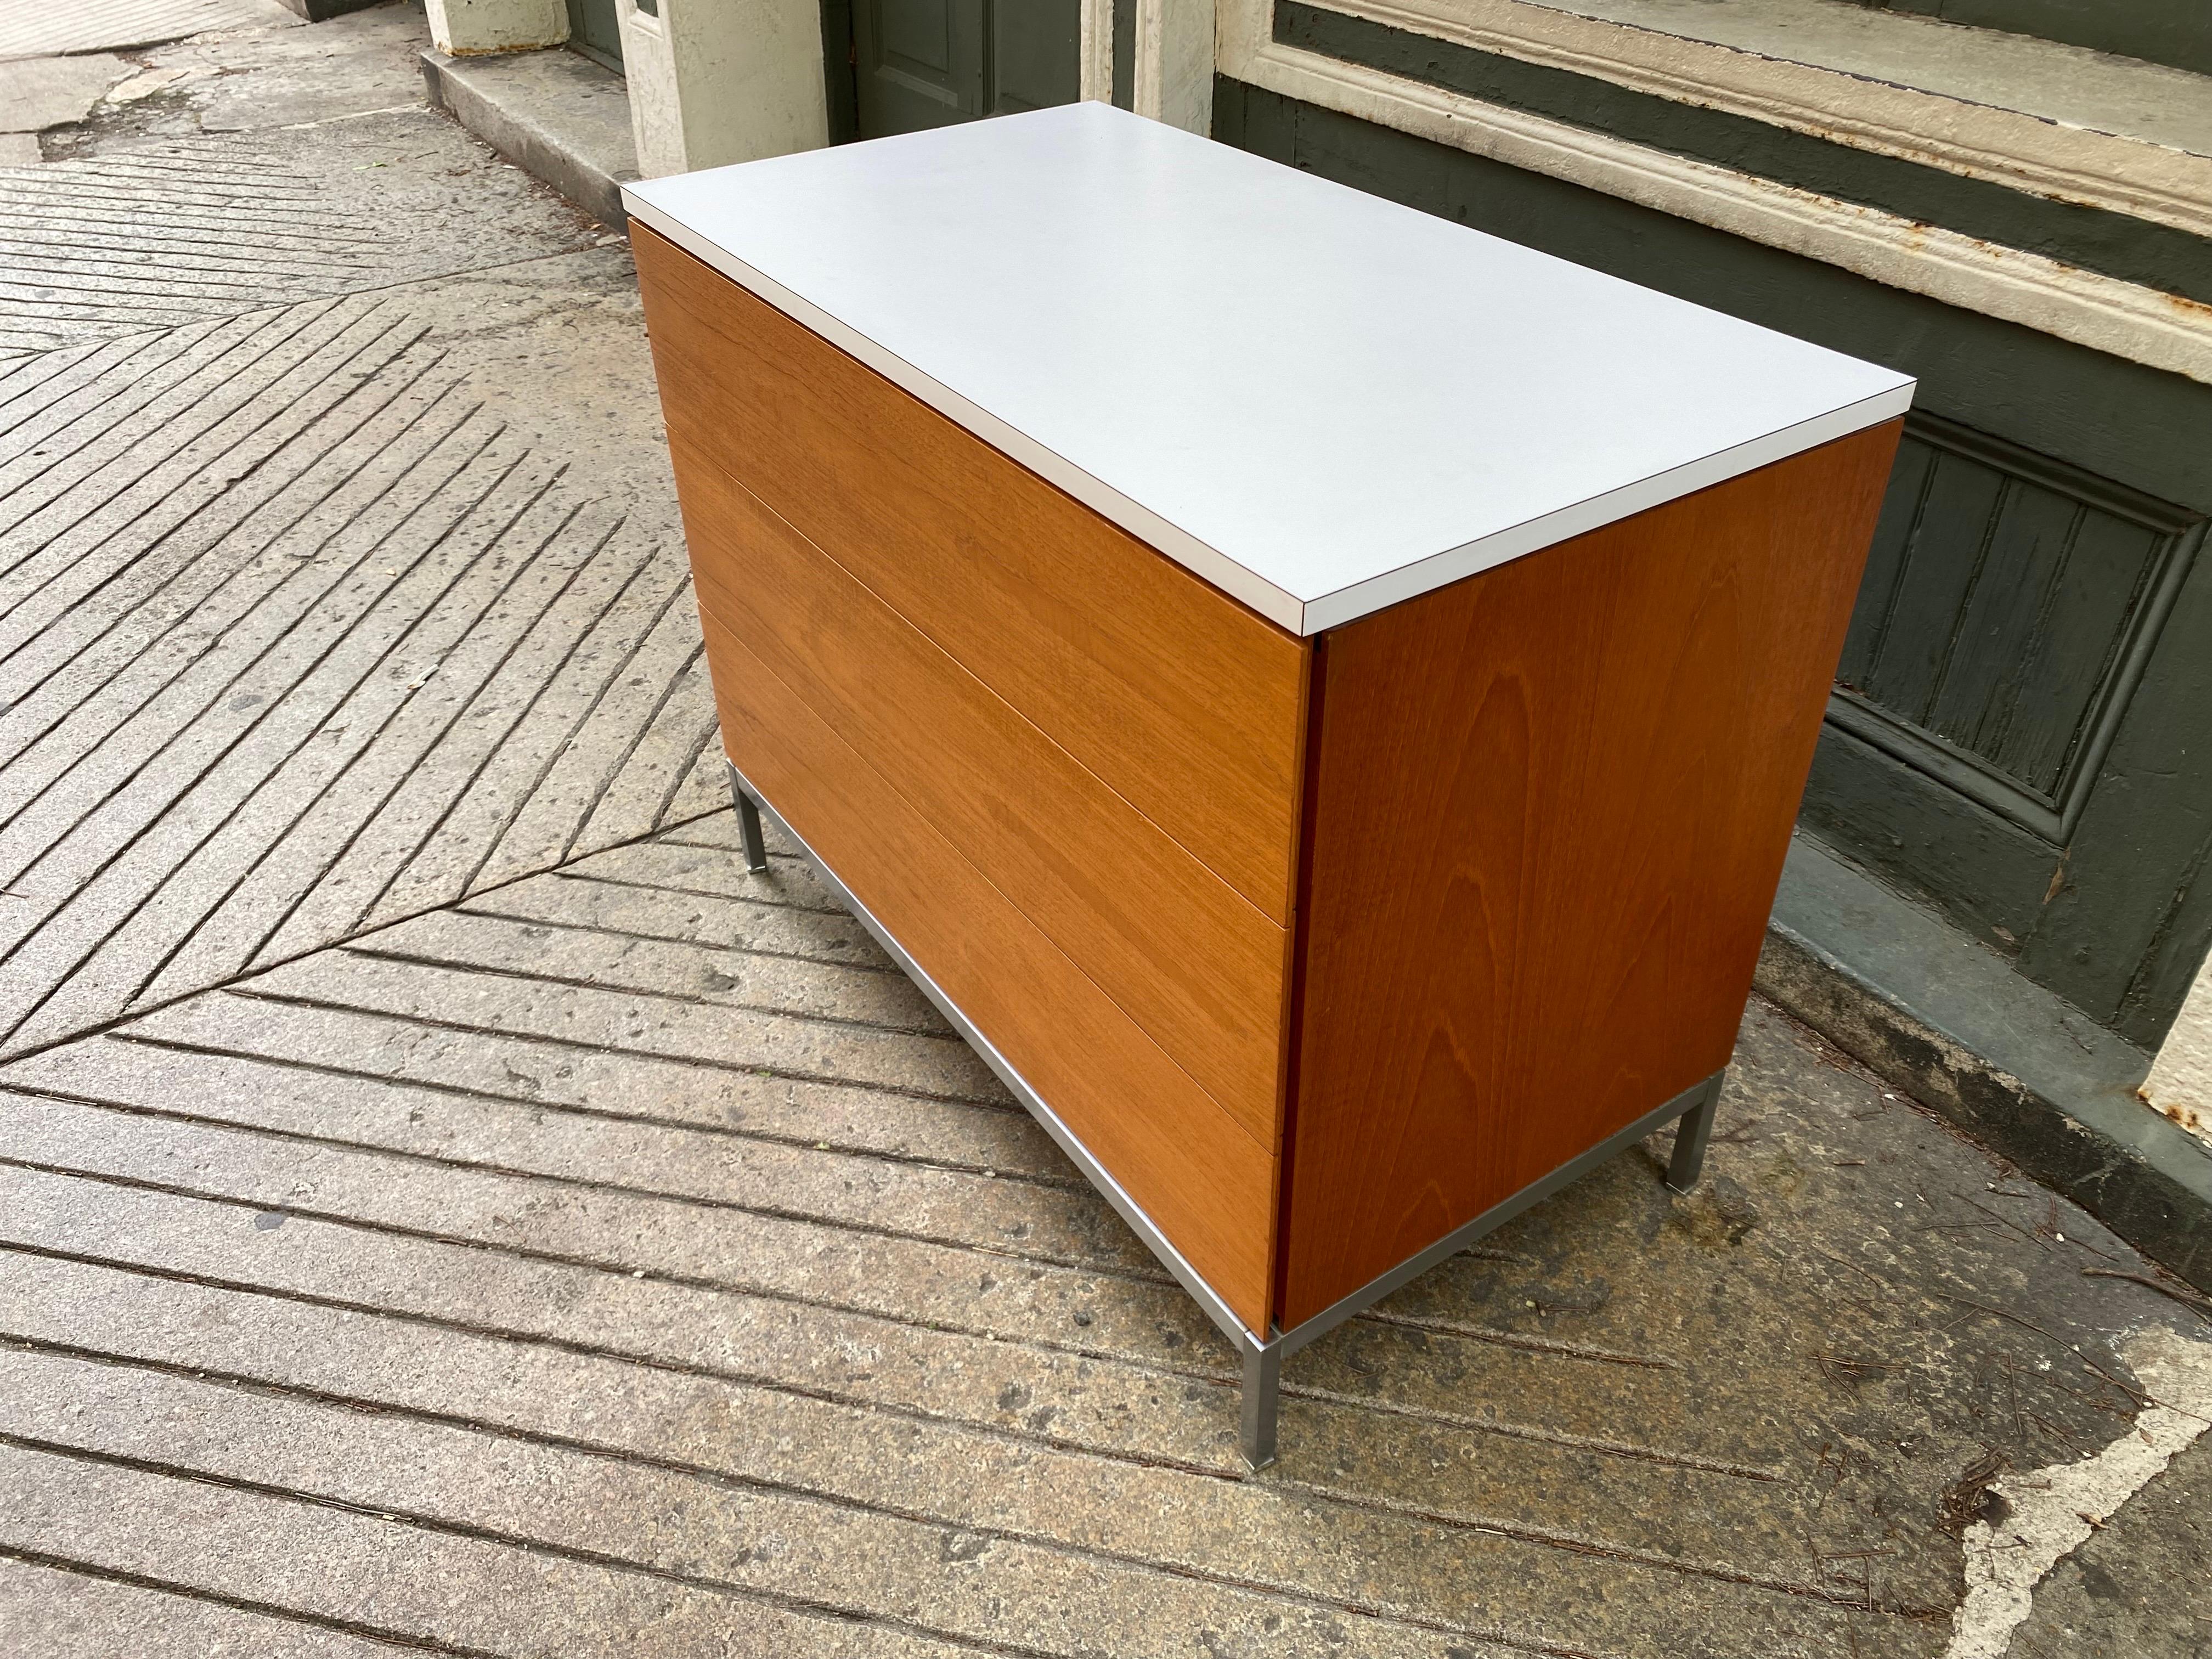 Florence Knoll for Knoll 3 Drawer Dresser that sits on a Satin Chrome Base with adjustable feet to level out cabinet easily. Three pull out drawers with recessed pulls on each end. Clean simple lines! Not often seen with white formica tops! Simple